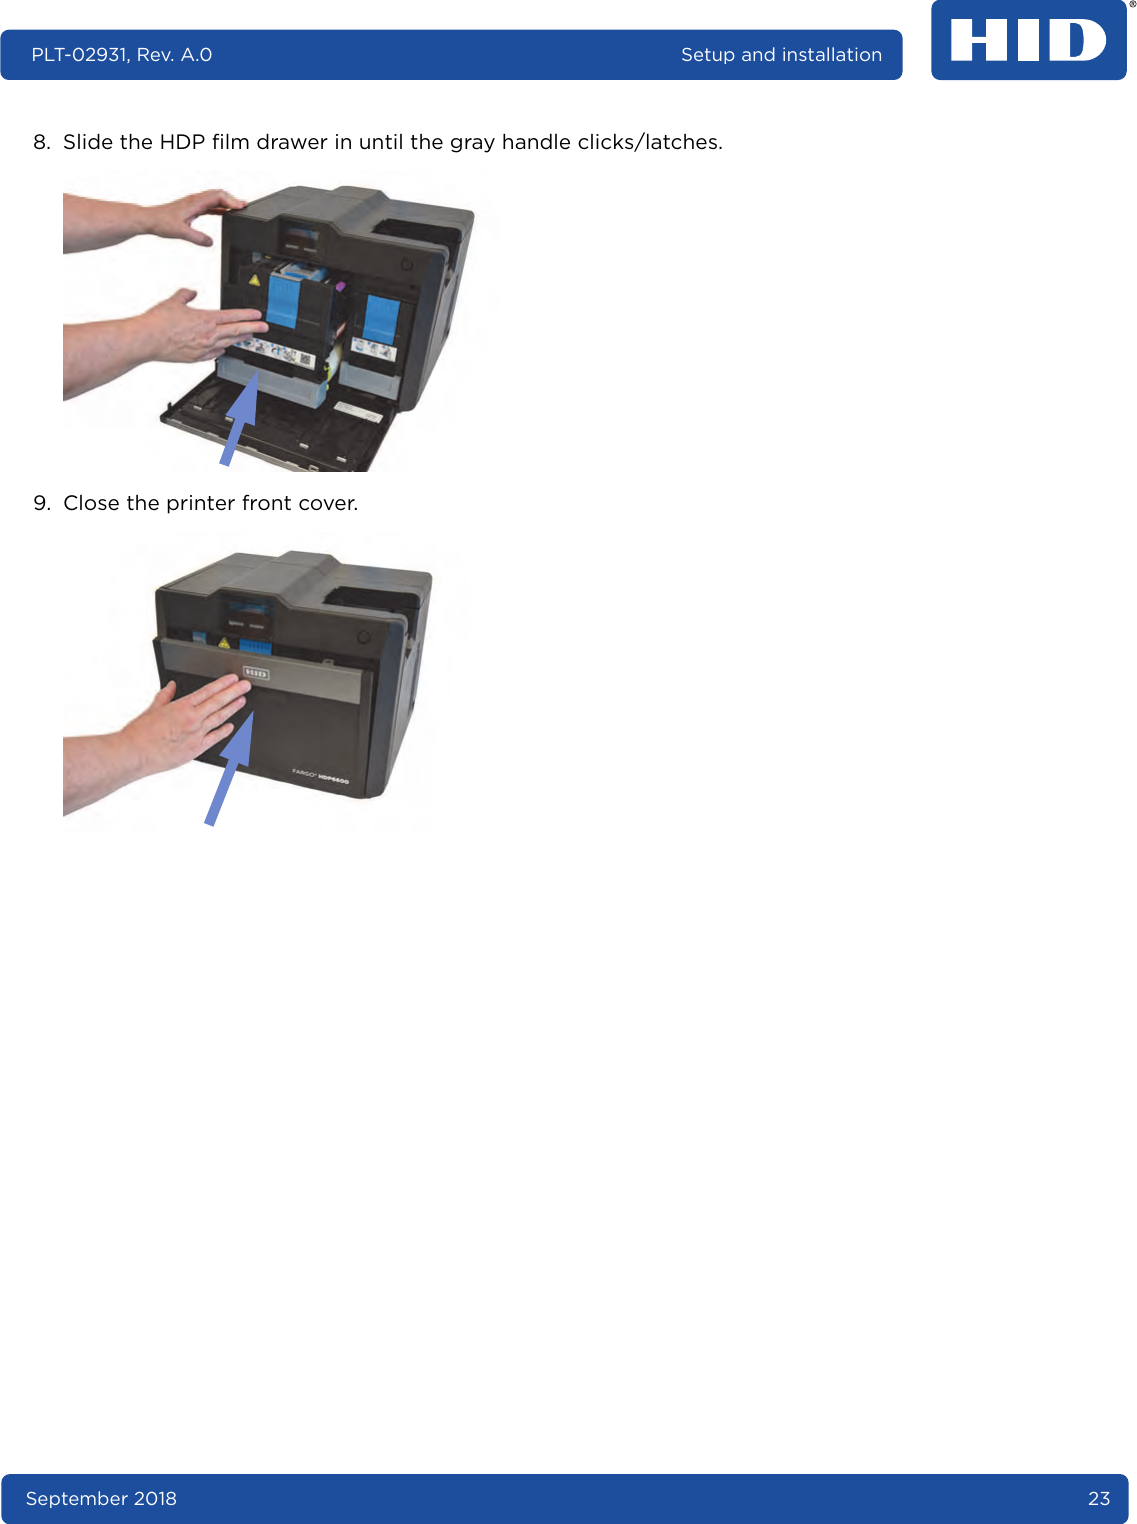 September 2018 23PLT-02931, Rev. A.0 Setup and installation8. Slide the HDP film drawer in until the gray handle clicks/latches. 9. Close the printer front cover. 